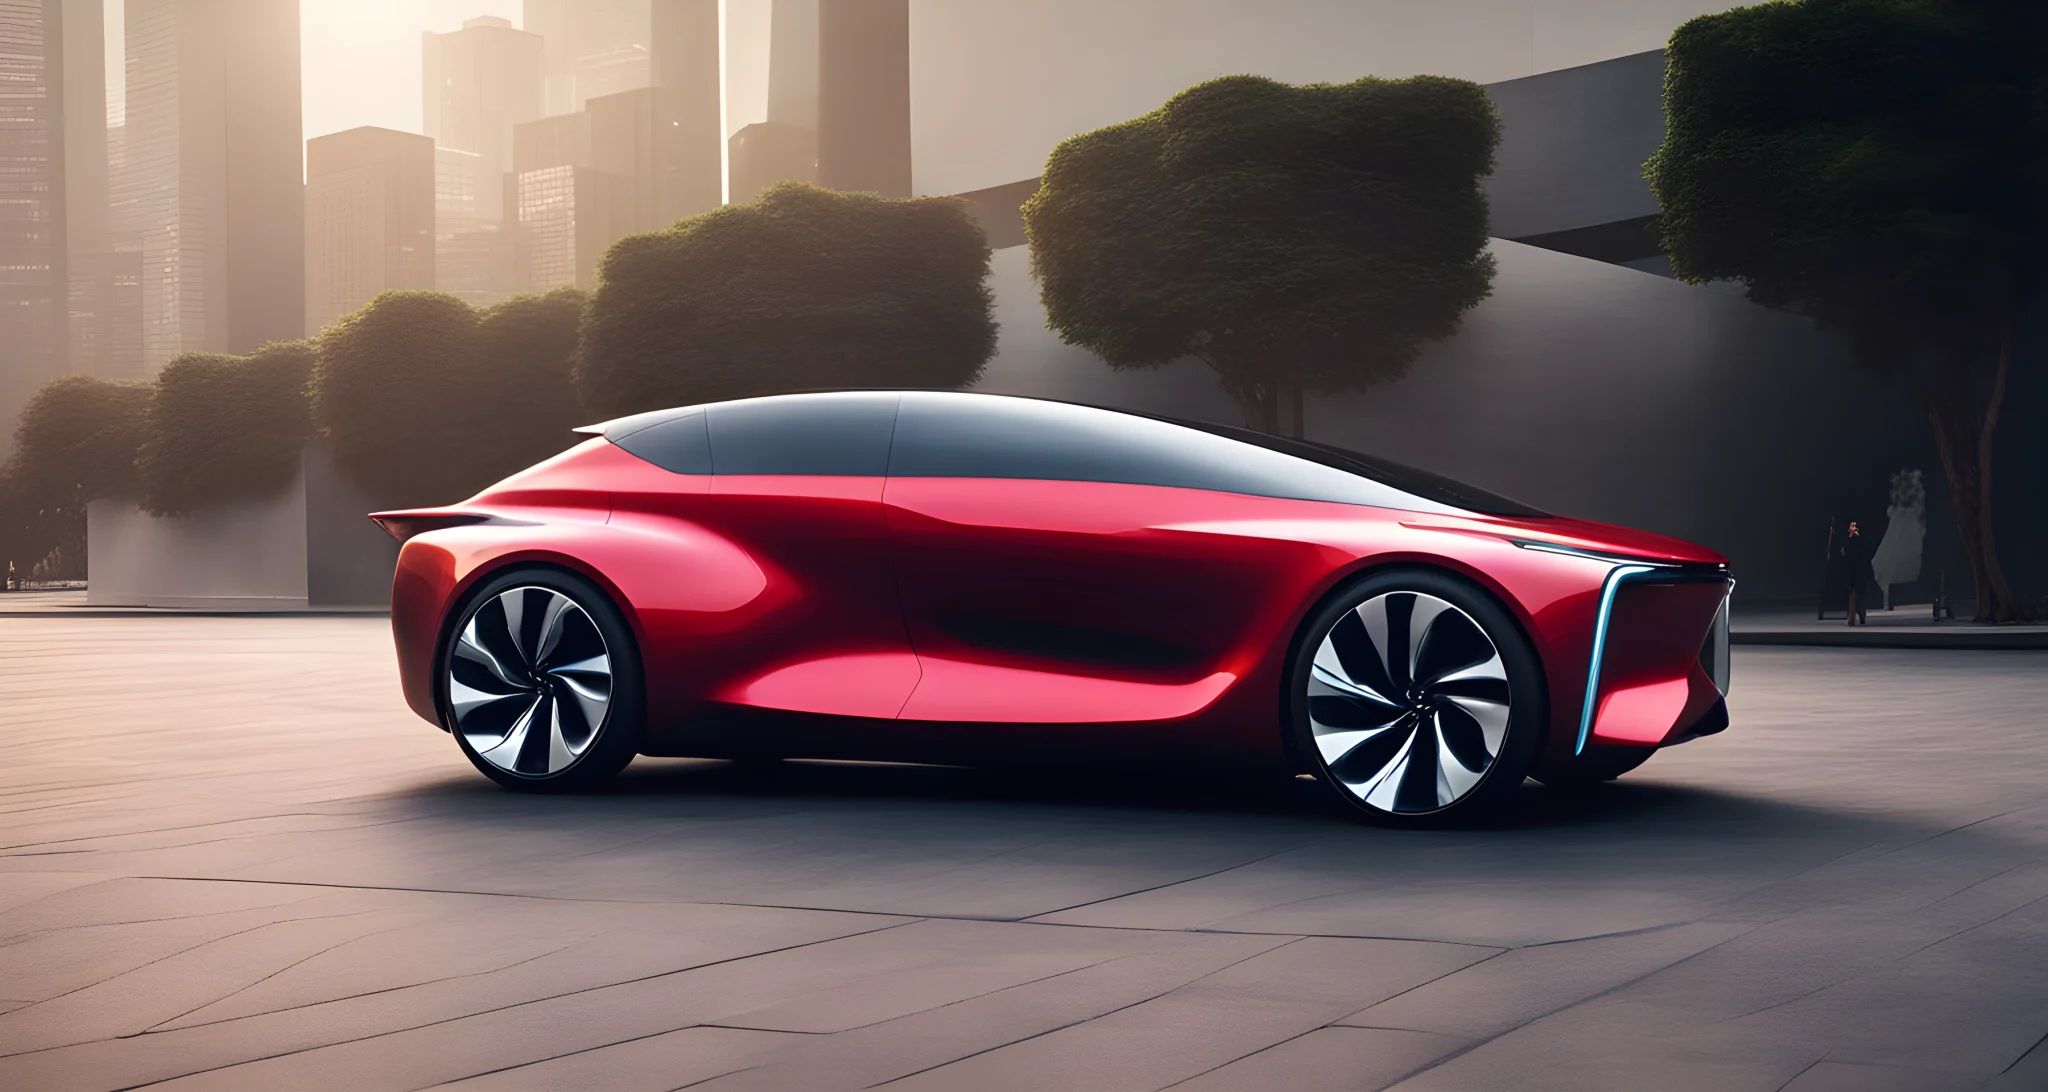 The image shows the Toyota FT-SE concept car, a sleek and futuristic vehicle with innovative design elements.